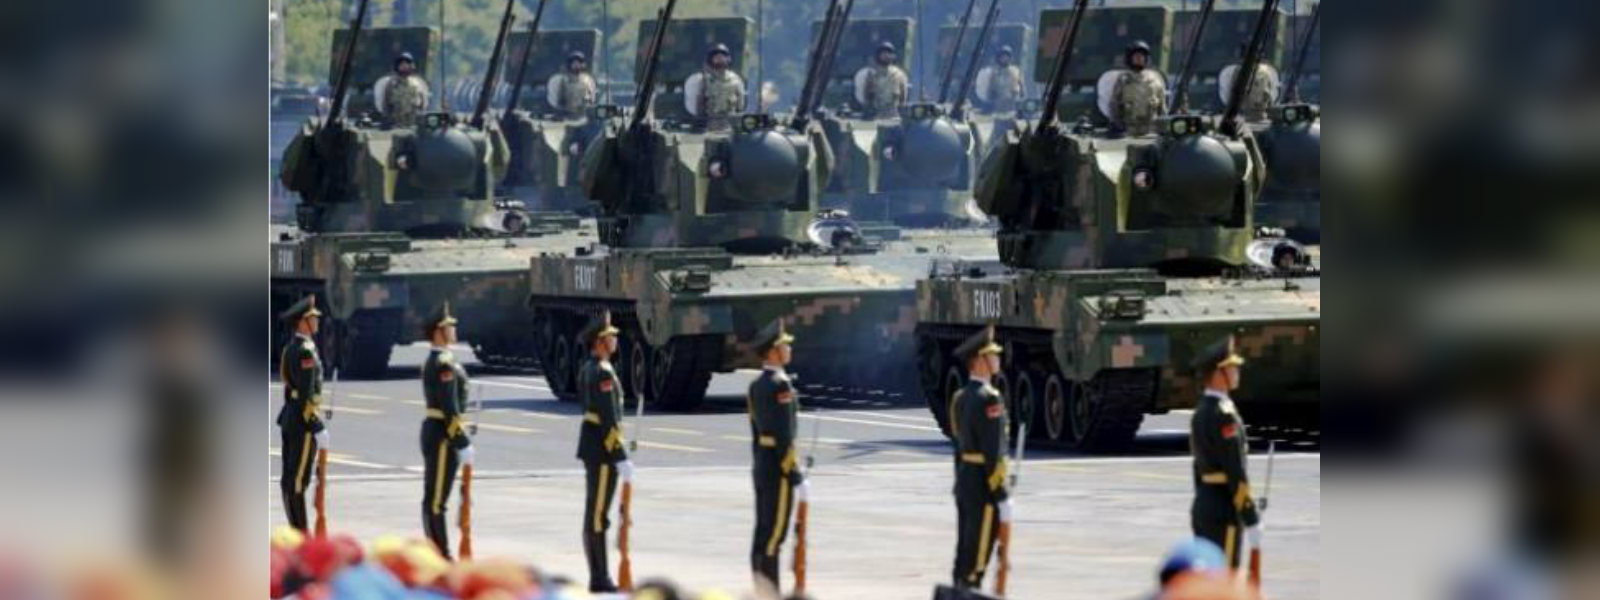 Russian capability to peak in 2028 : US Army 